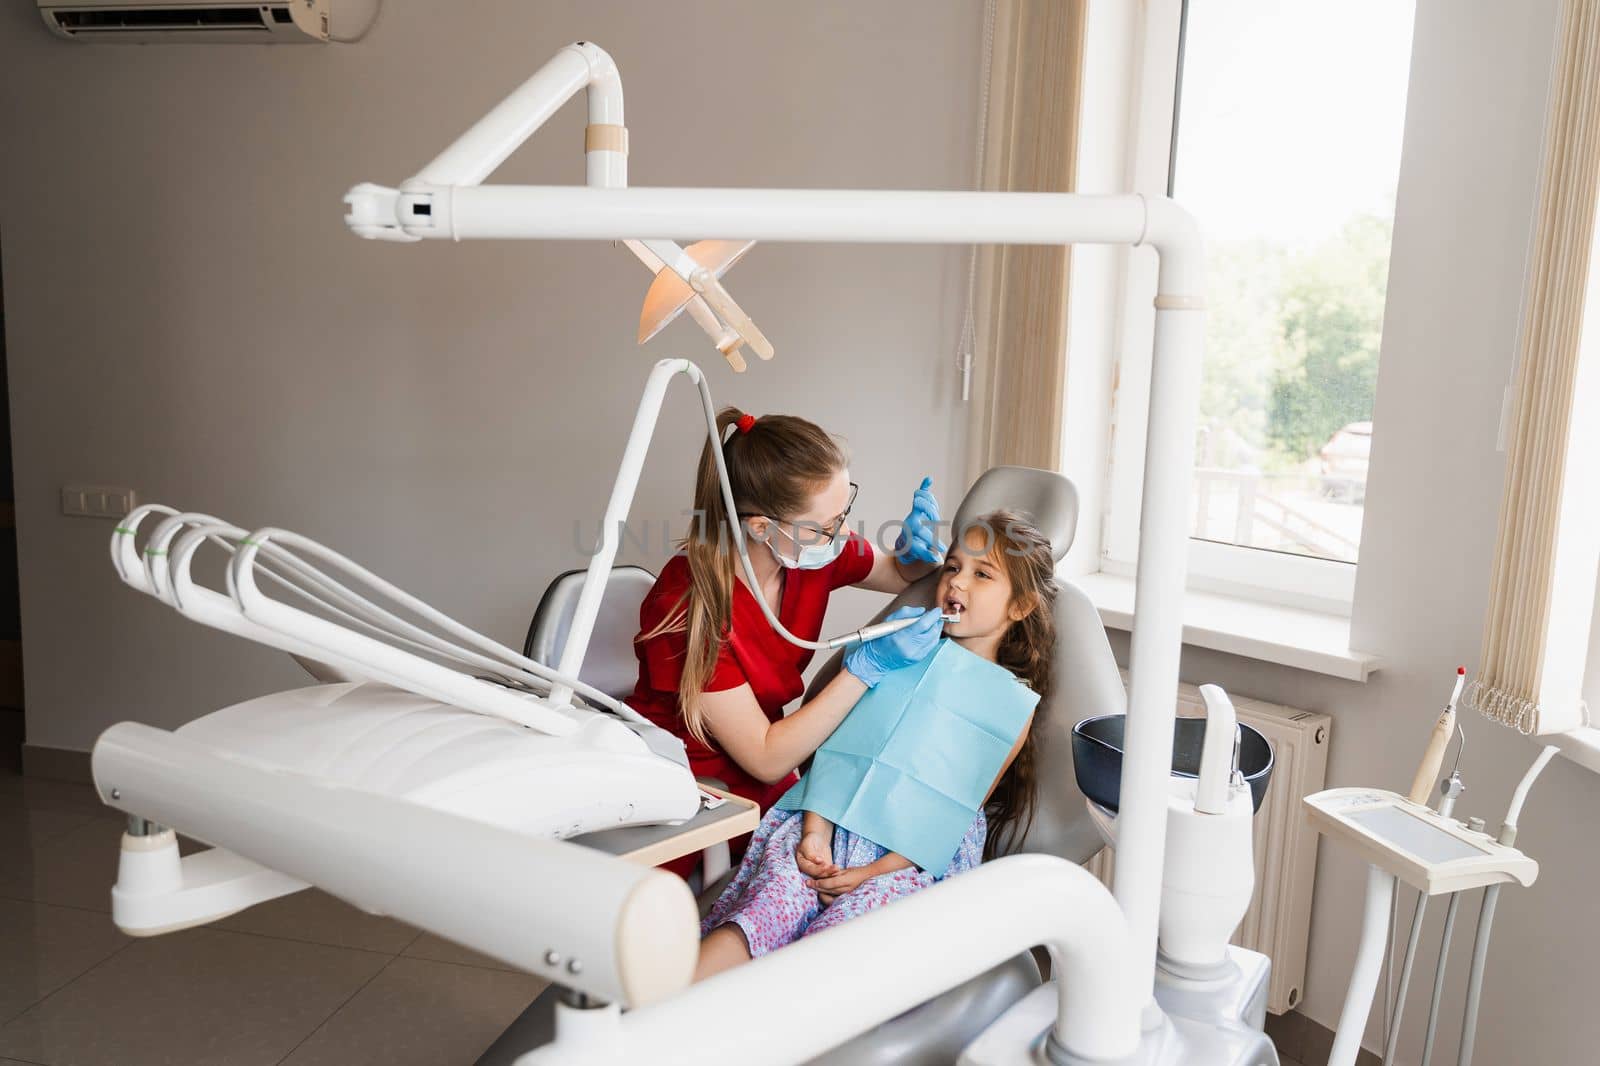 Pediatric dentist examines and consults kid patient in dentistry. Professional hygiene for teeth of child in dentistry. Professional teeth cleaning for child girl